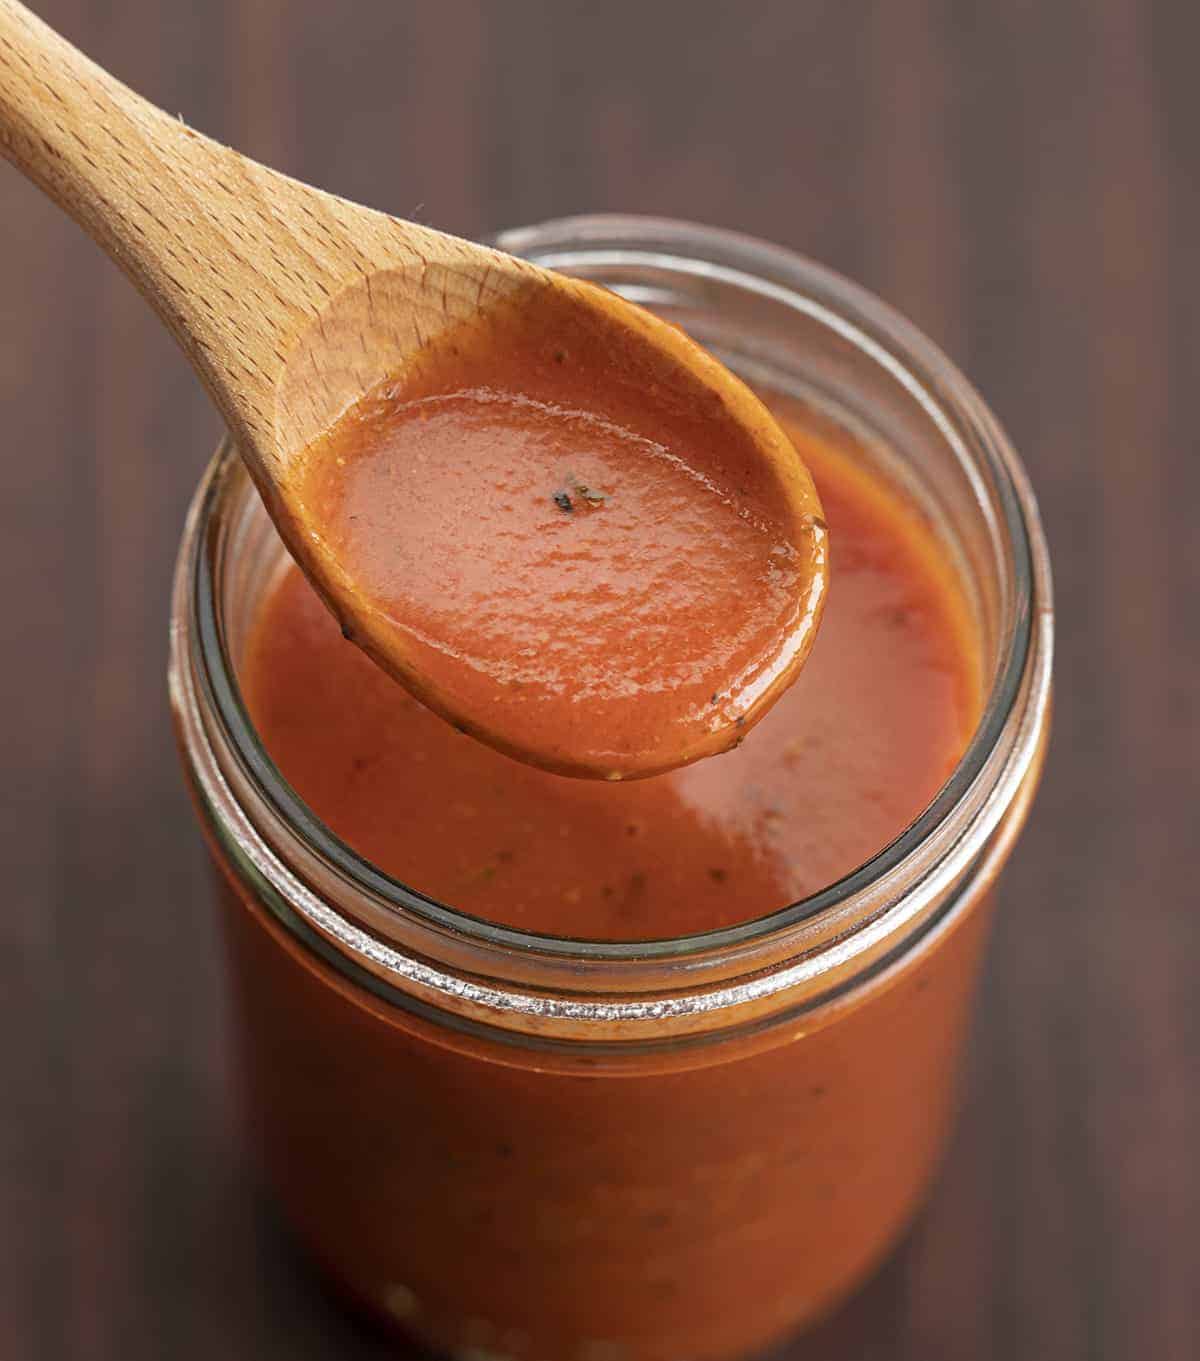 Spoon with Easy Enchilada Sauce on it Lifting Sauce up from a Jar